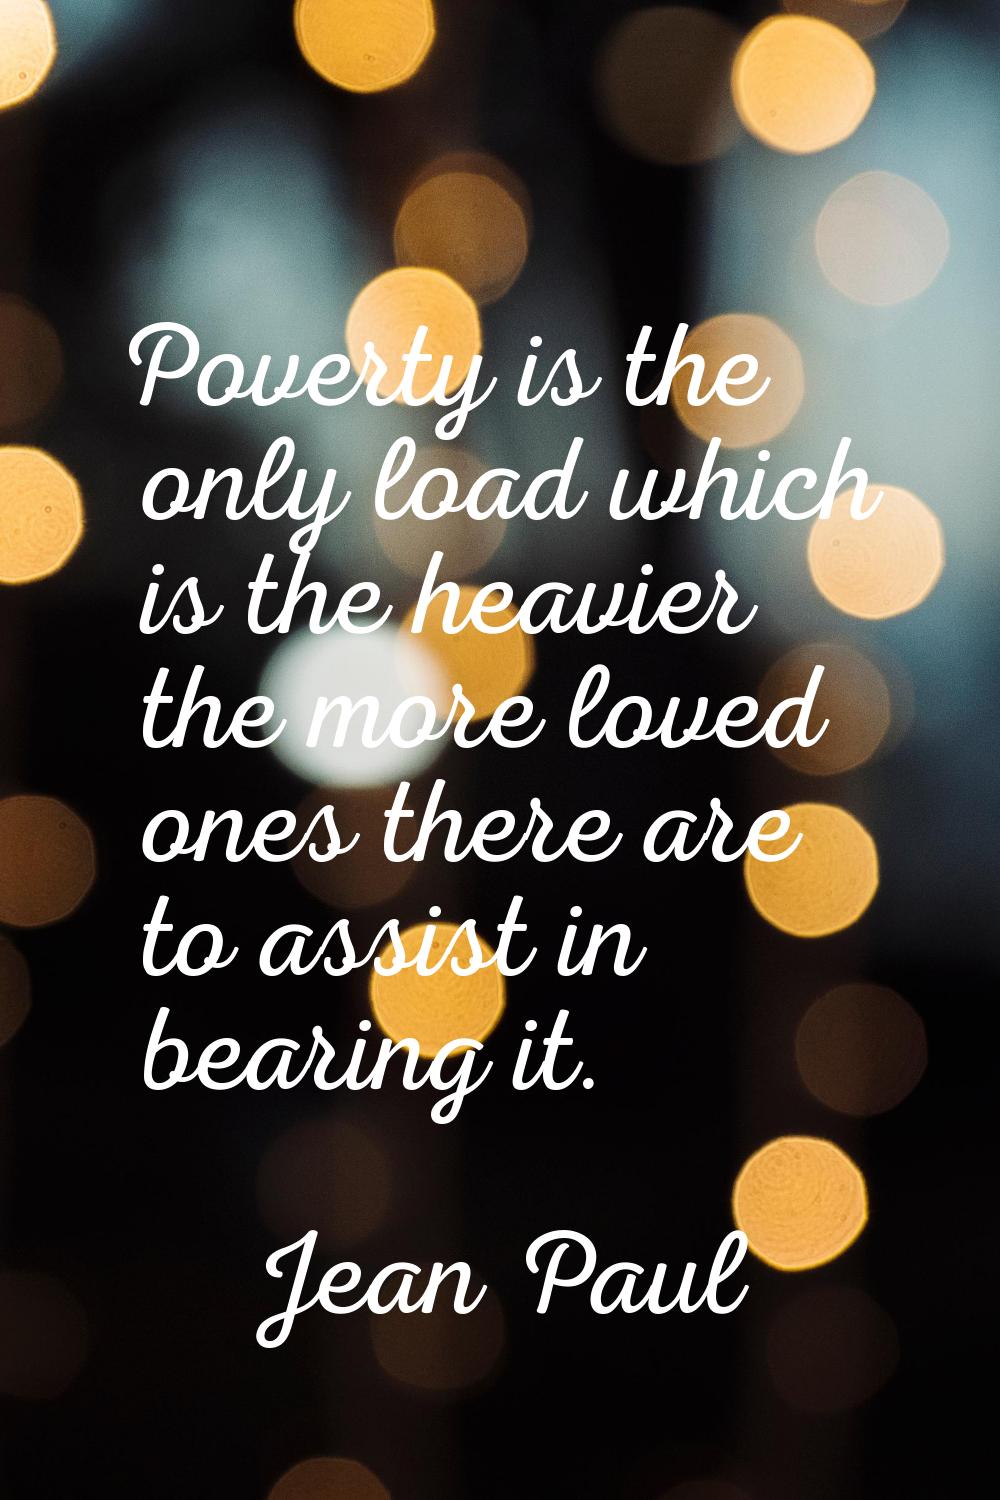 Poverty is the only load which is the heavier the more loved ones there are to assist in bearing it